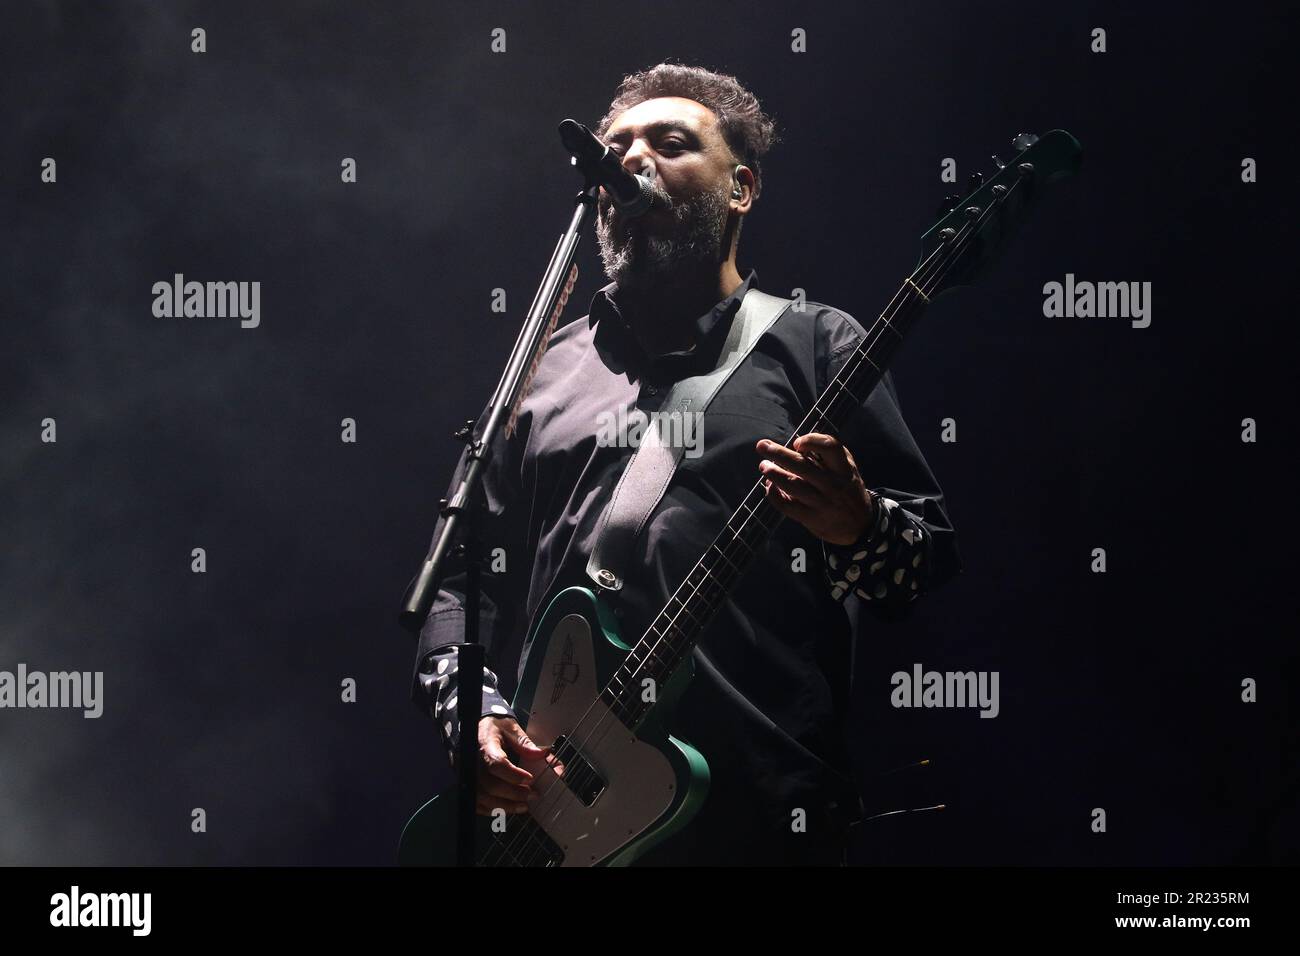 May 12, 2023, Mexico City, Mexico: Paco Ayala member of Mexican band Molotov performs on stage as part of their ‘EstallaMolotov’ tour at Foro Sol. on May 12, 2023 in Mexico City, Mexico. (Photo by Ismael Rosas/ Eyepix Group) Stock Photo